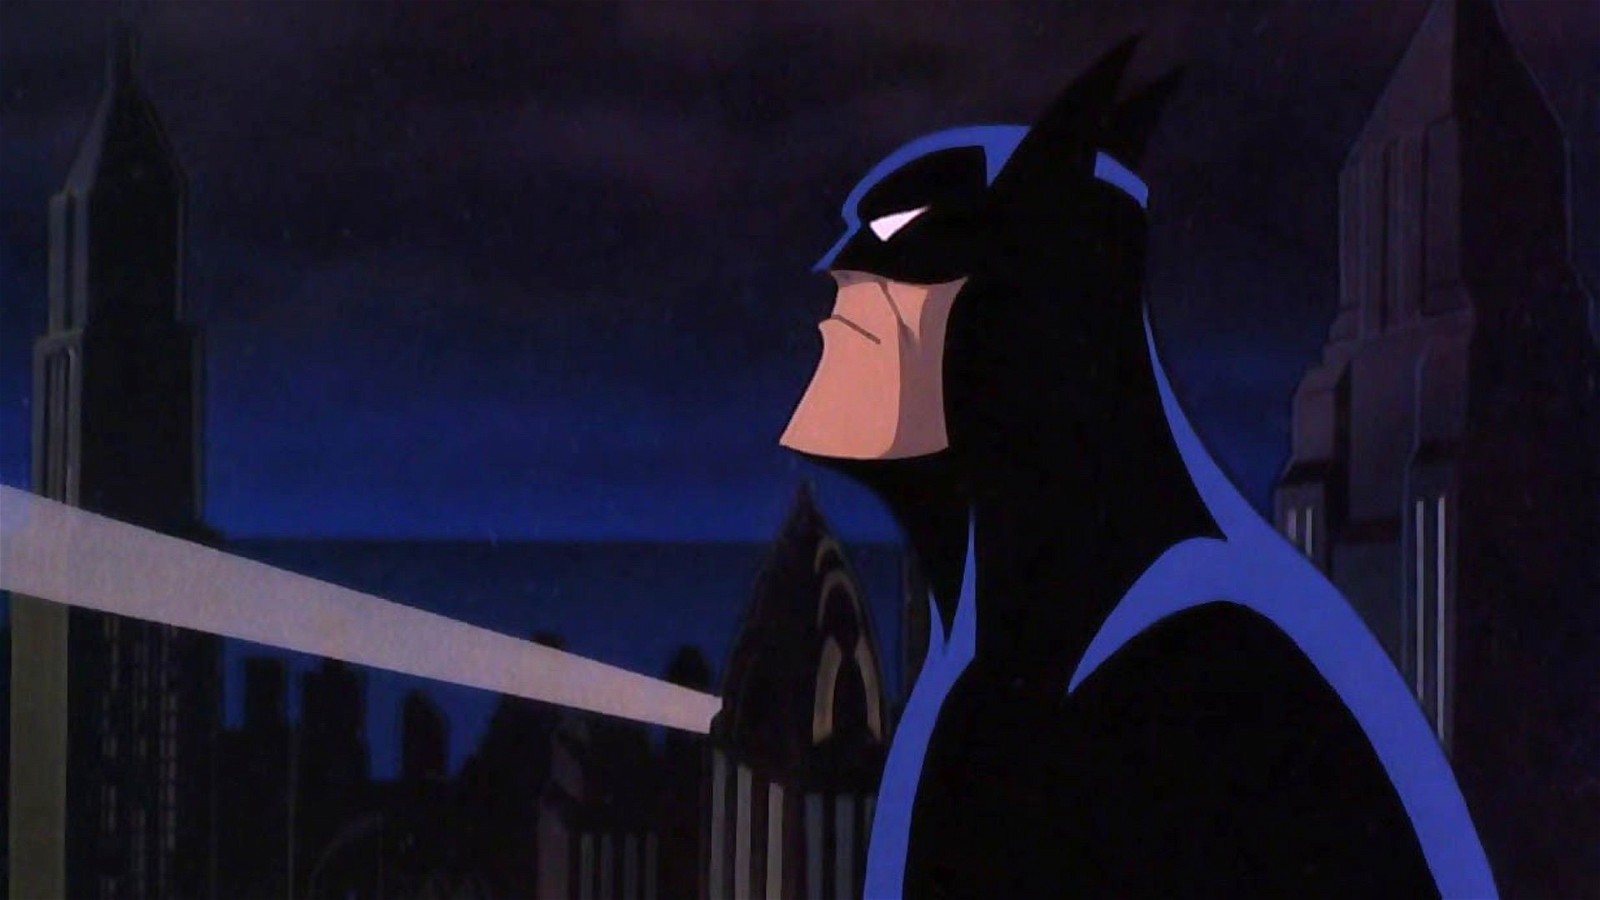 Batman: The Animated Series creator Bruce Timm never committed to a live-action film despite creating the most definitive version of the character